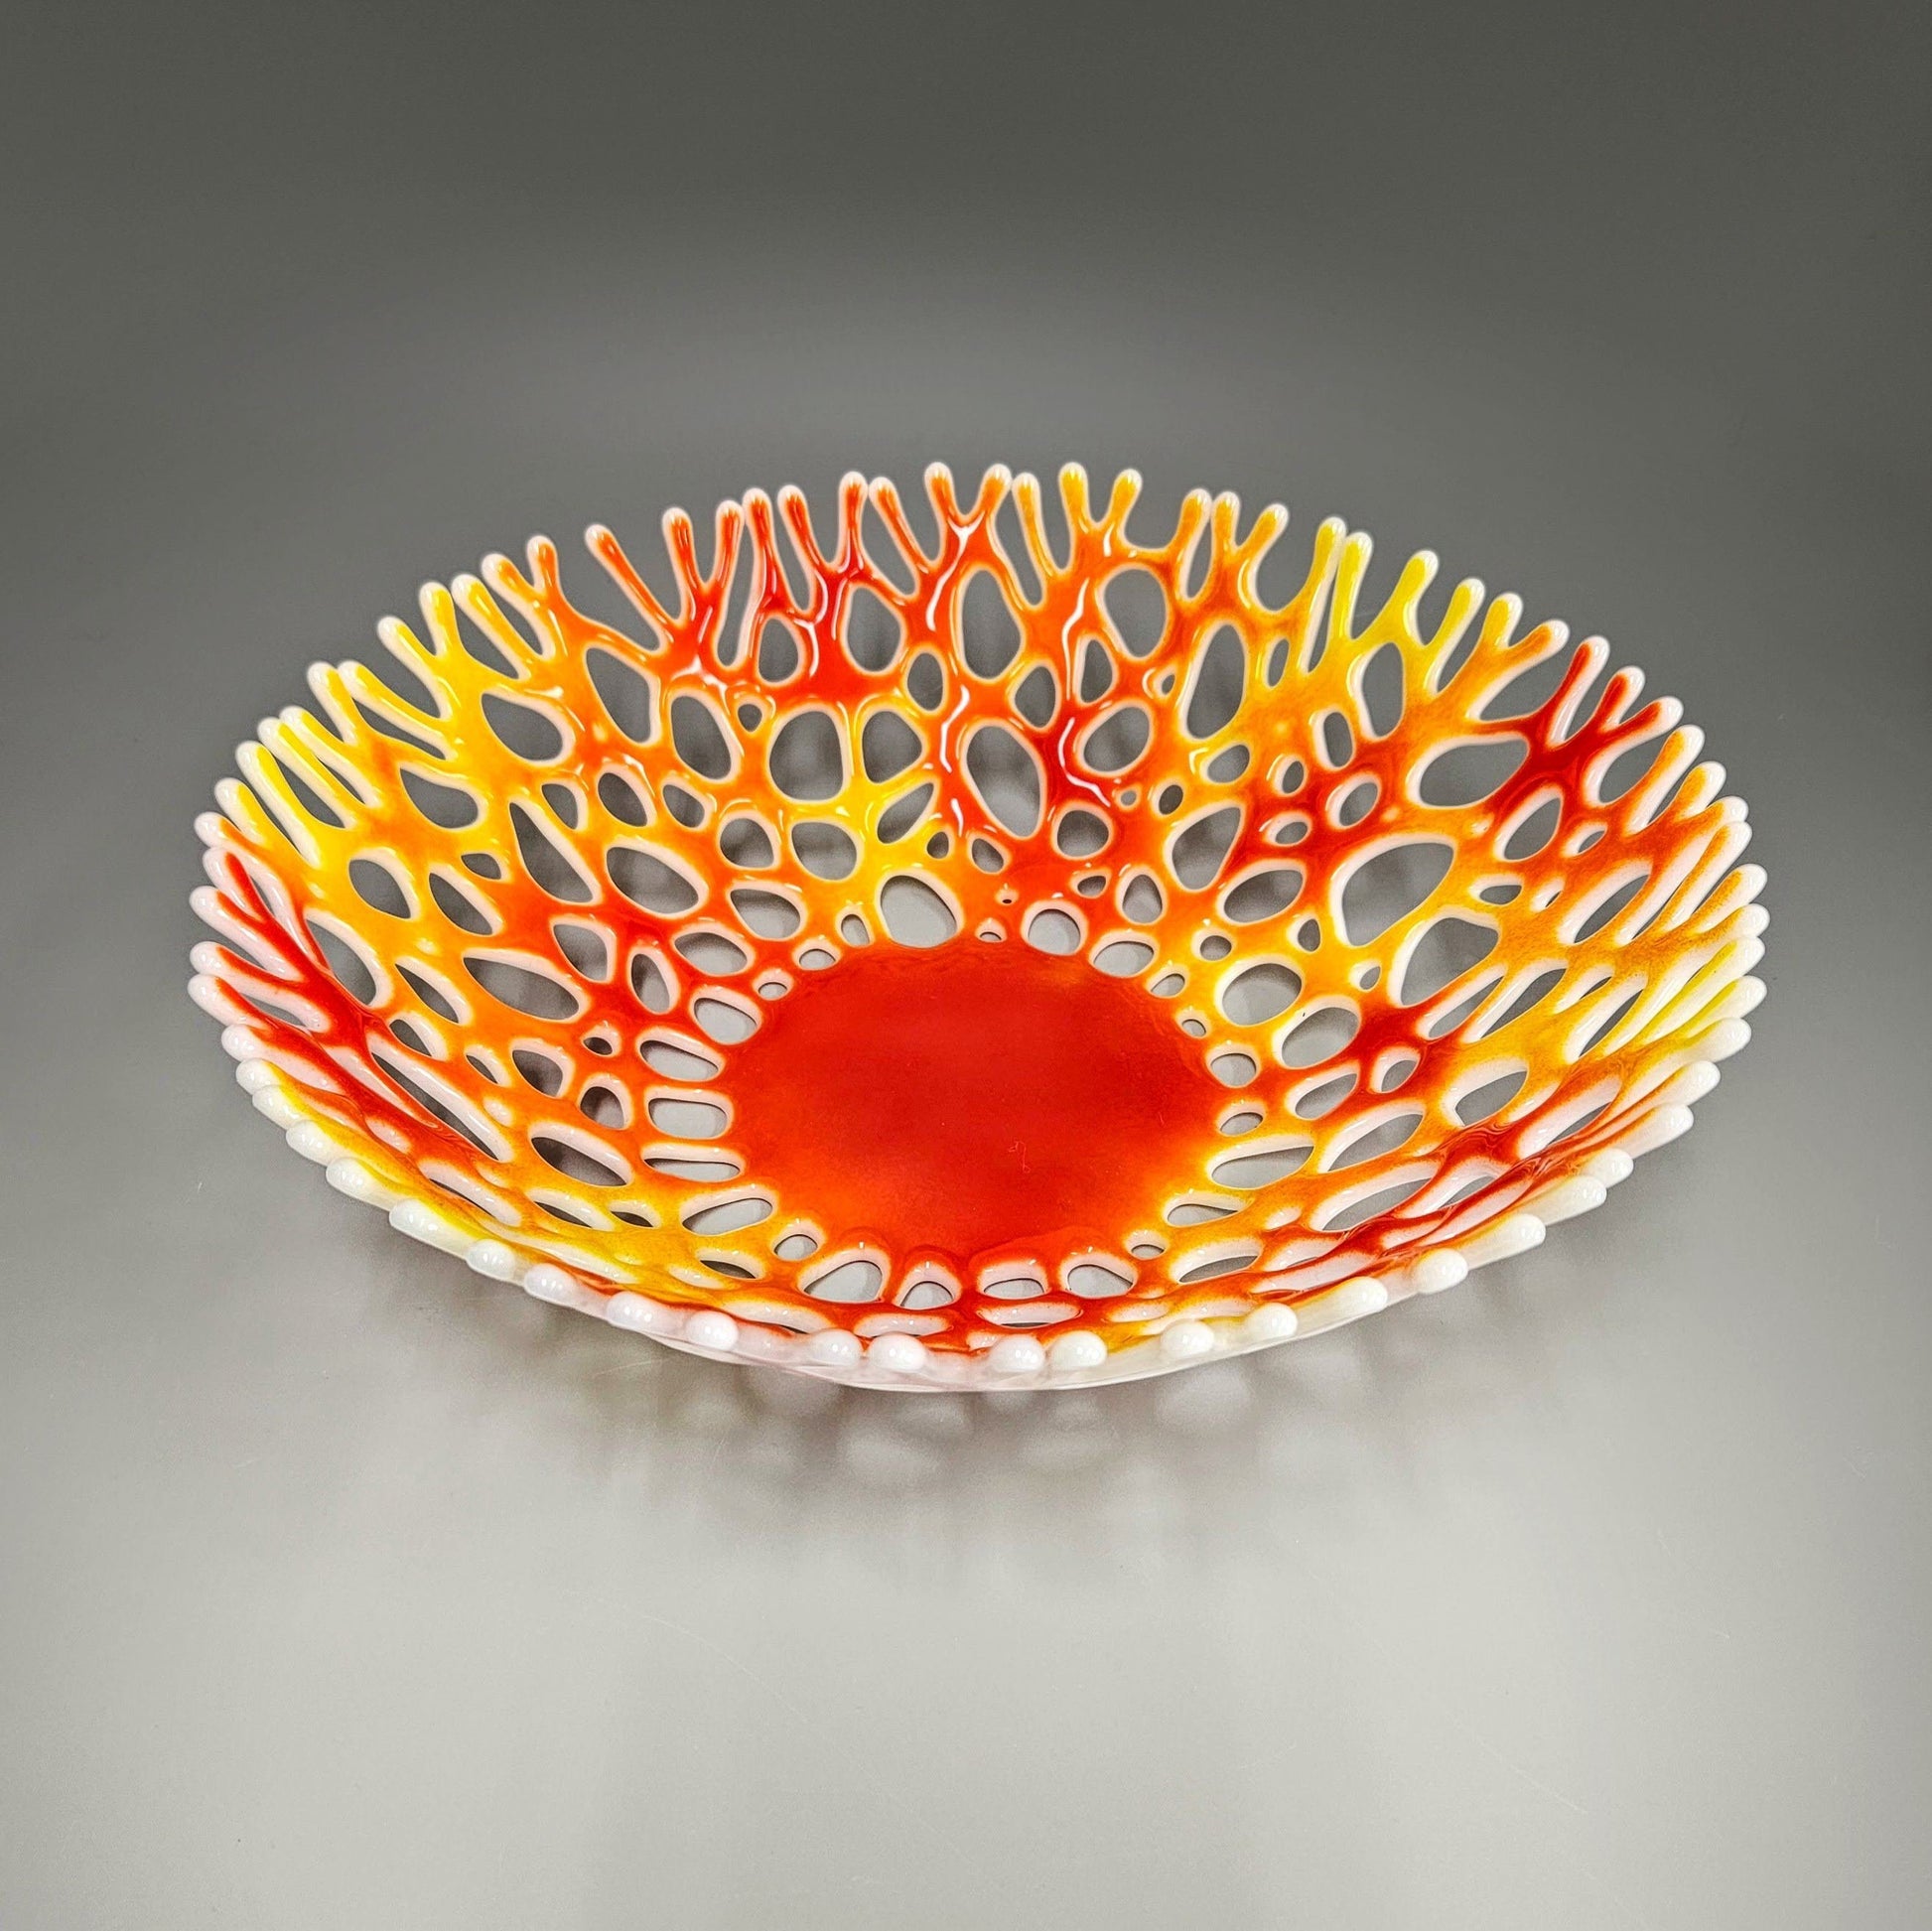 Large Glass Art Coral Bowl in Bright Red and Yellow | Beach House Art